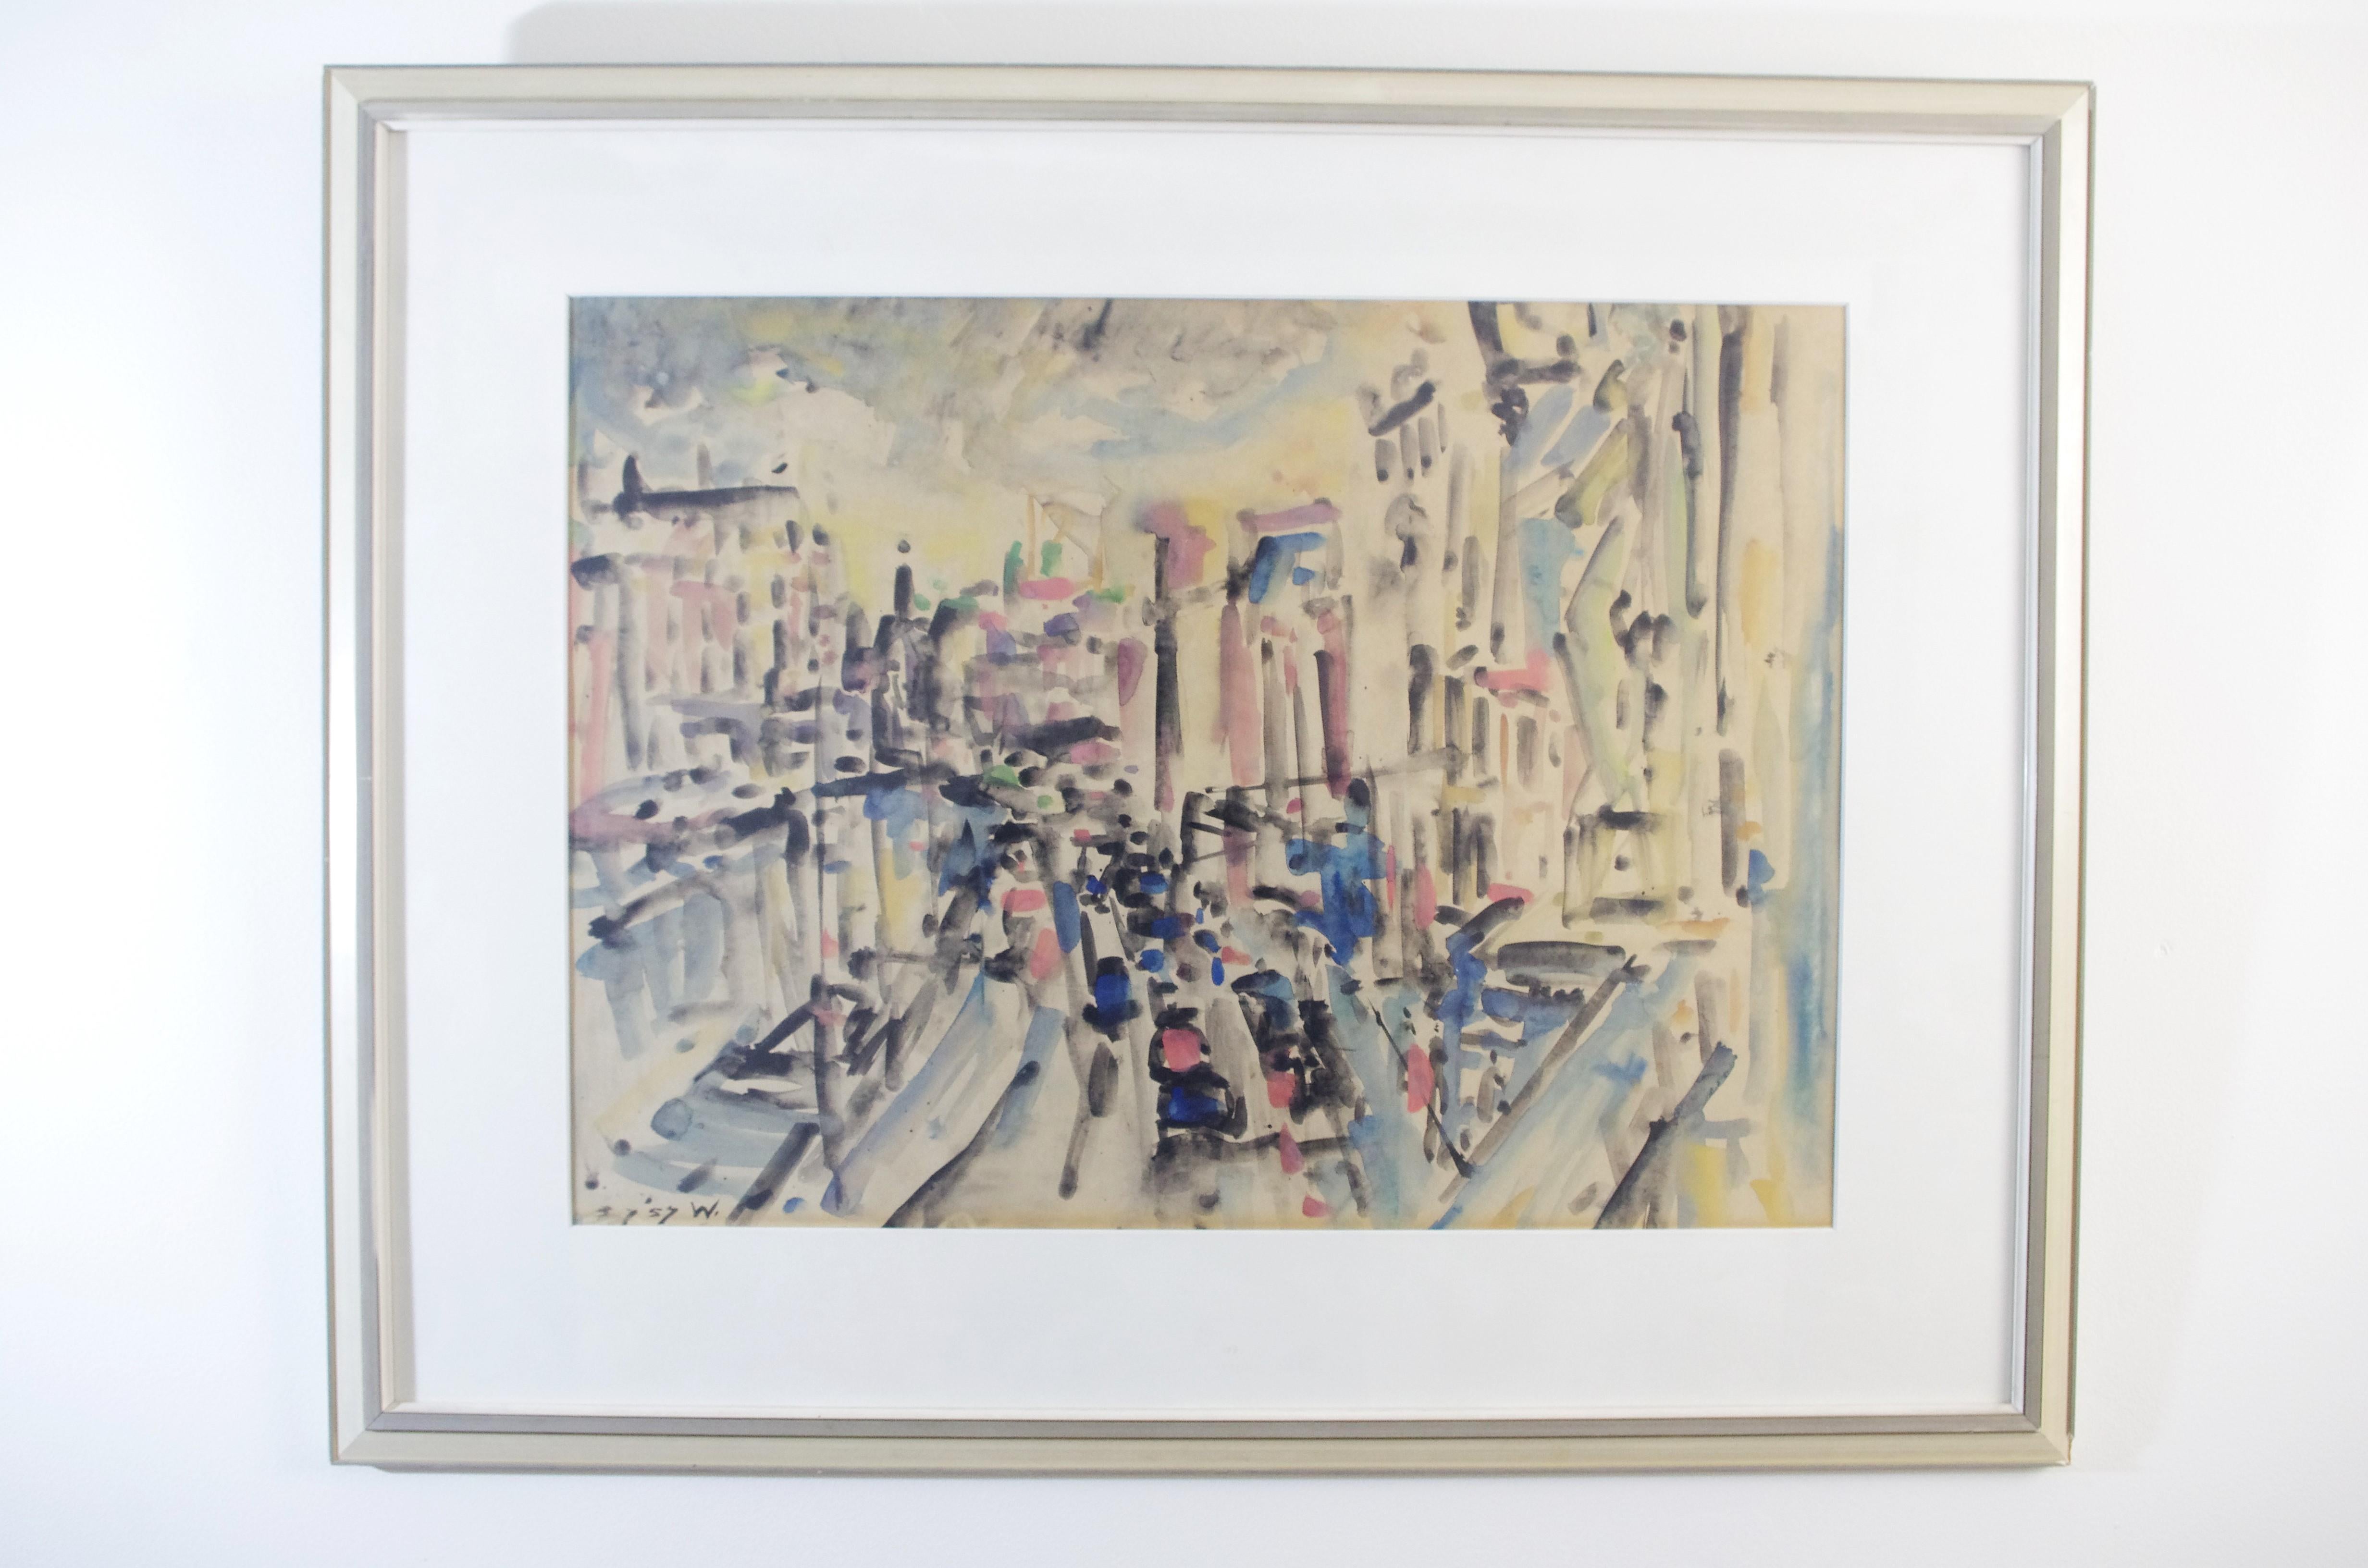 Product description:
This aquarel has been made by Henk Willemse, an autodidact from the city of Amsterdam. Willemse started painting during the second world war when he was taking refuge in an atelier. Willemse was a friend of members of the CoBrA